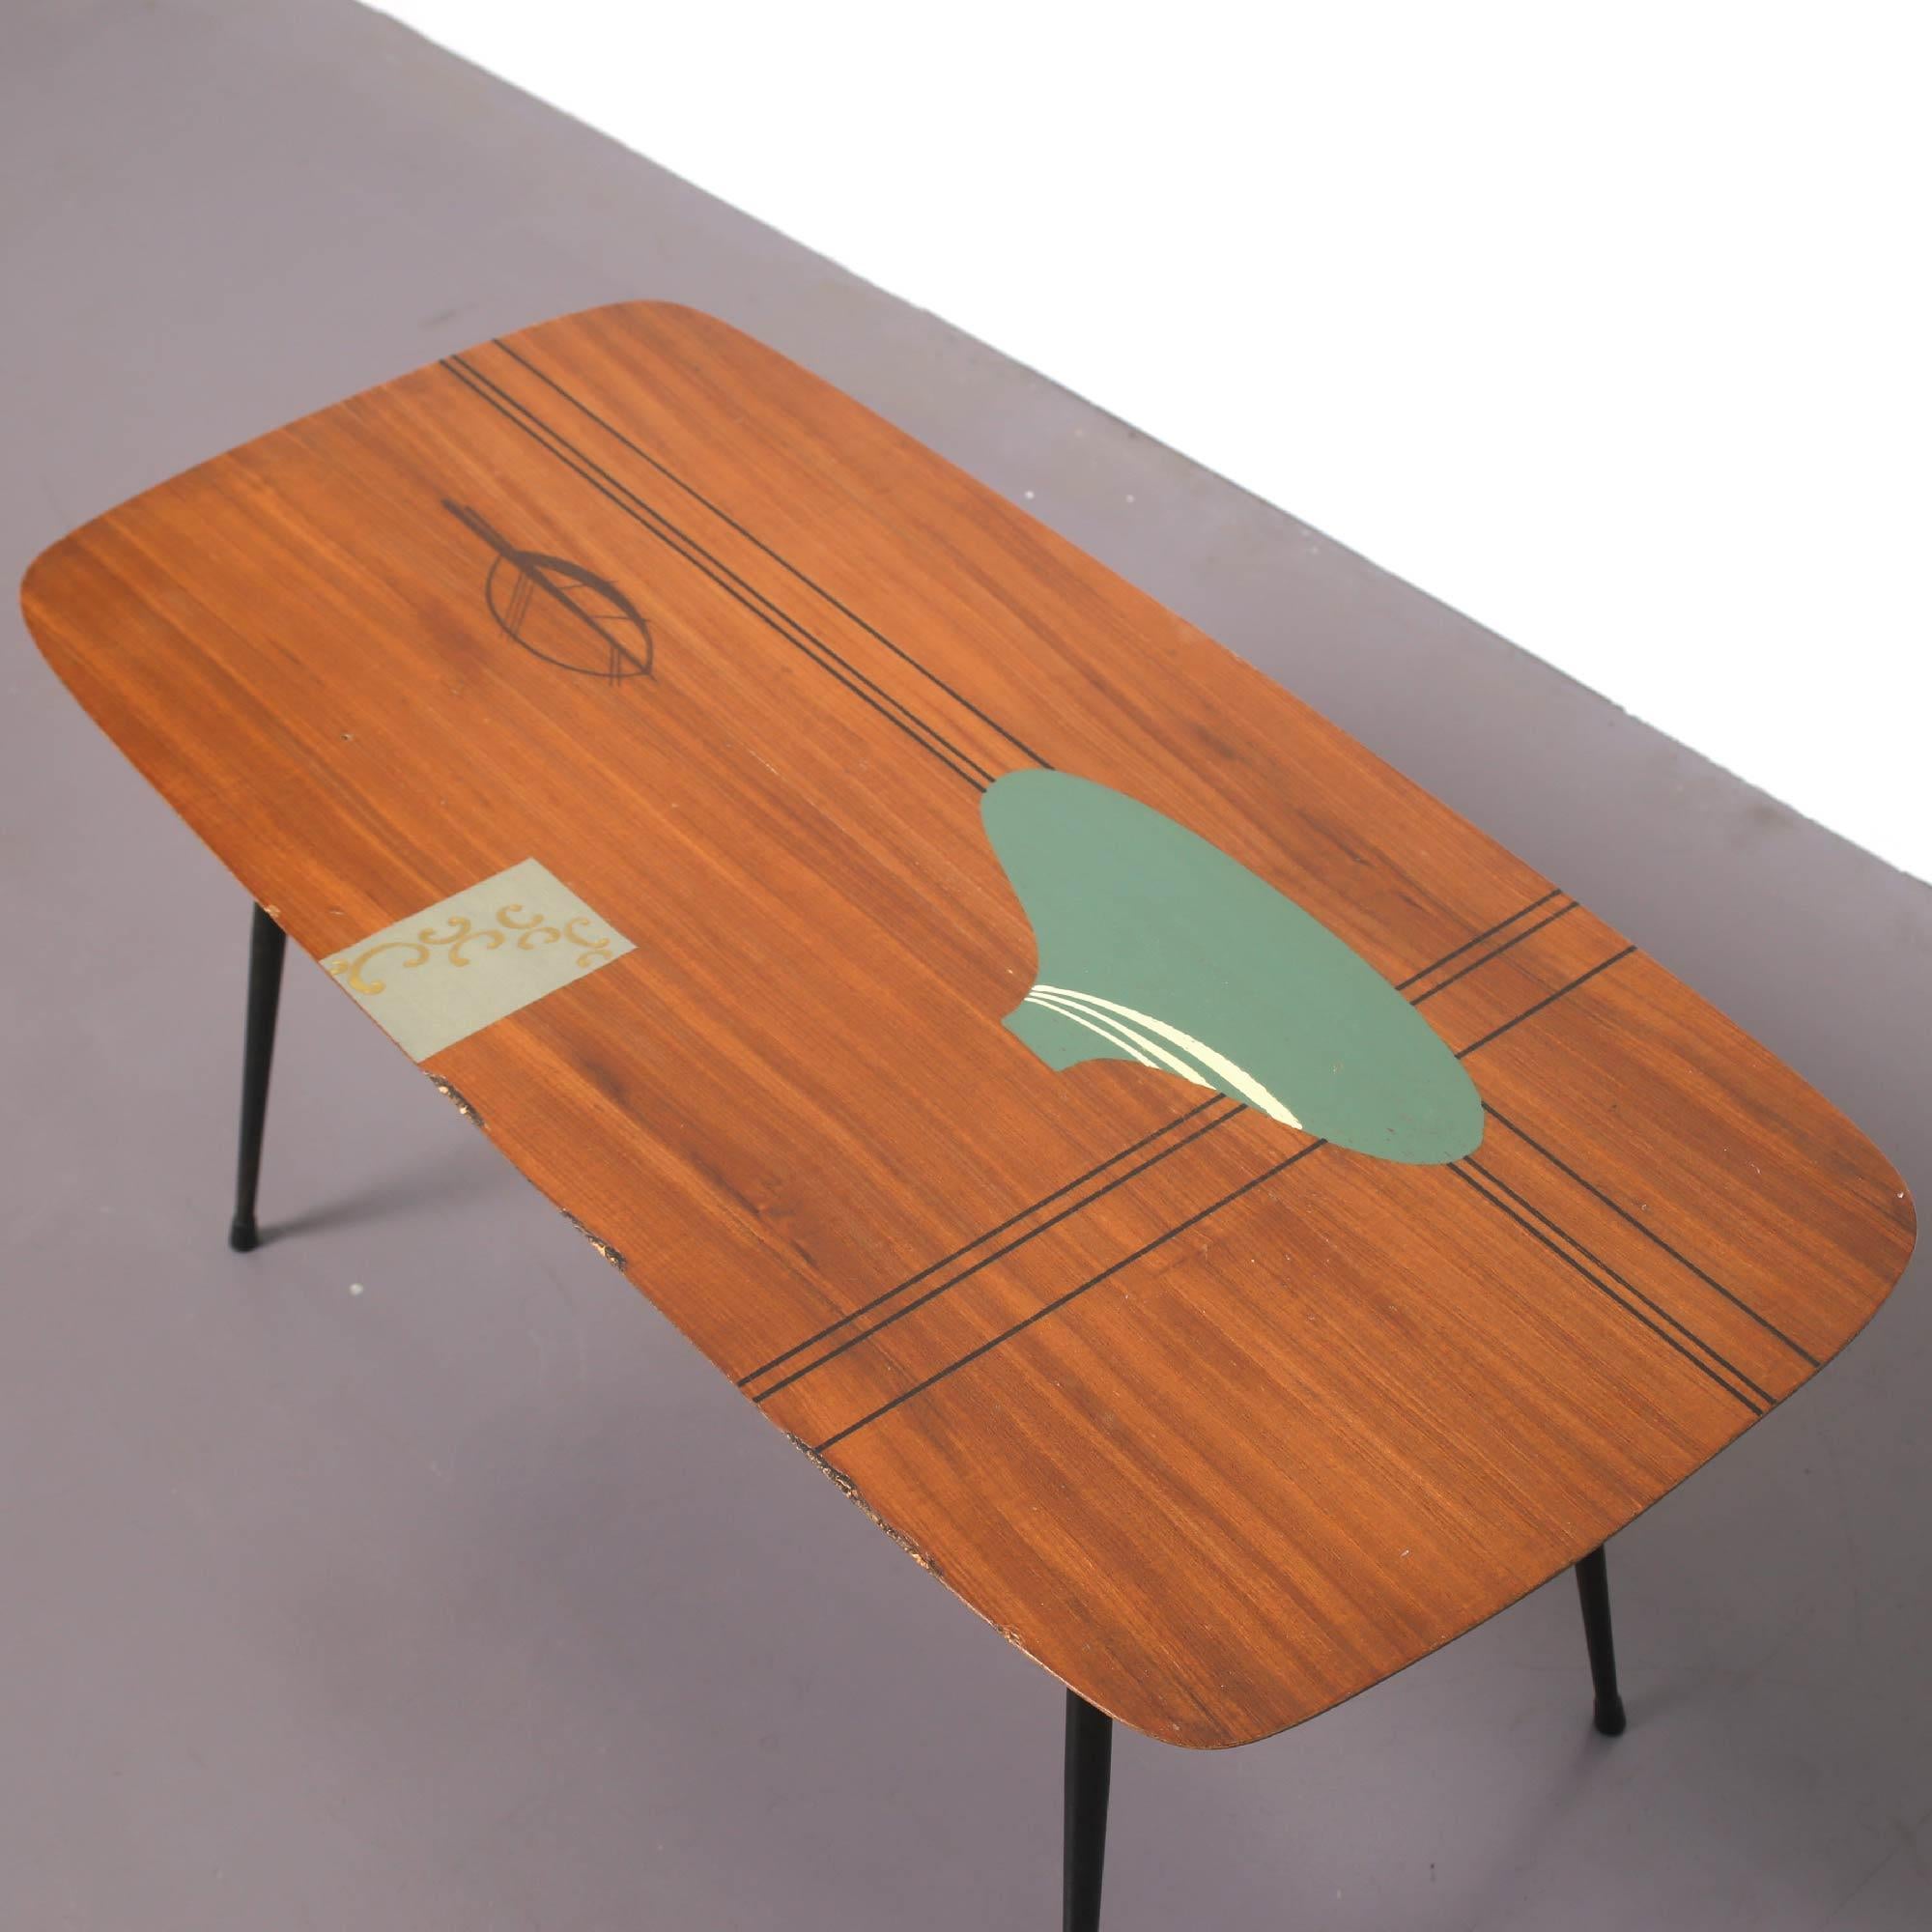 Midcentury coffee table in teak with unique artwork in midcentury style.
The table is in very good conditions and very well presented.